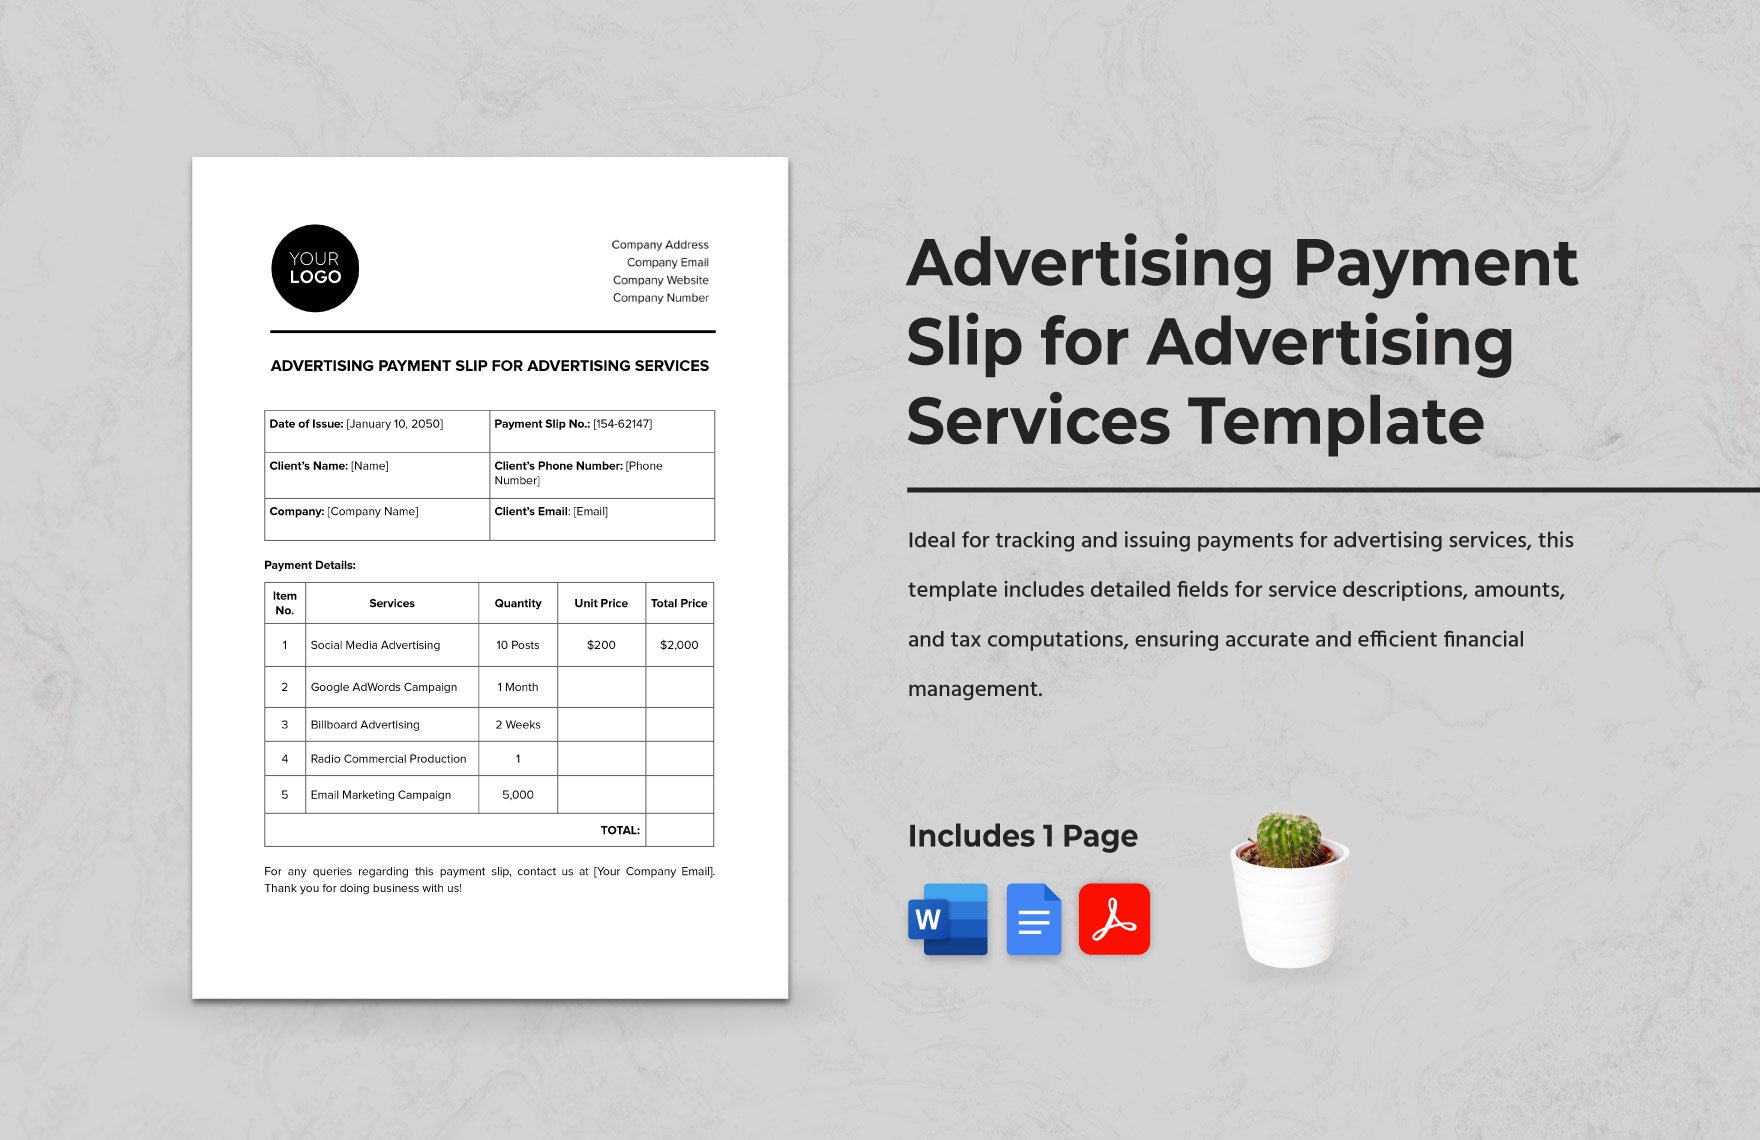 Advertising Payment Slip for Advertising Services Template